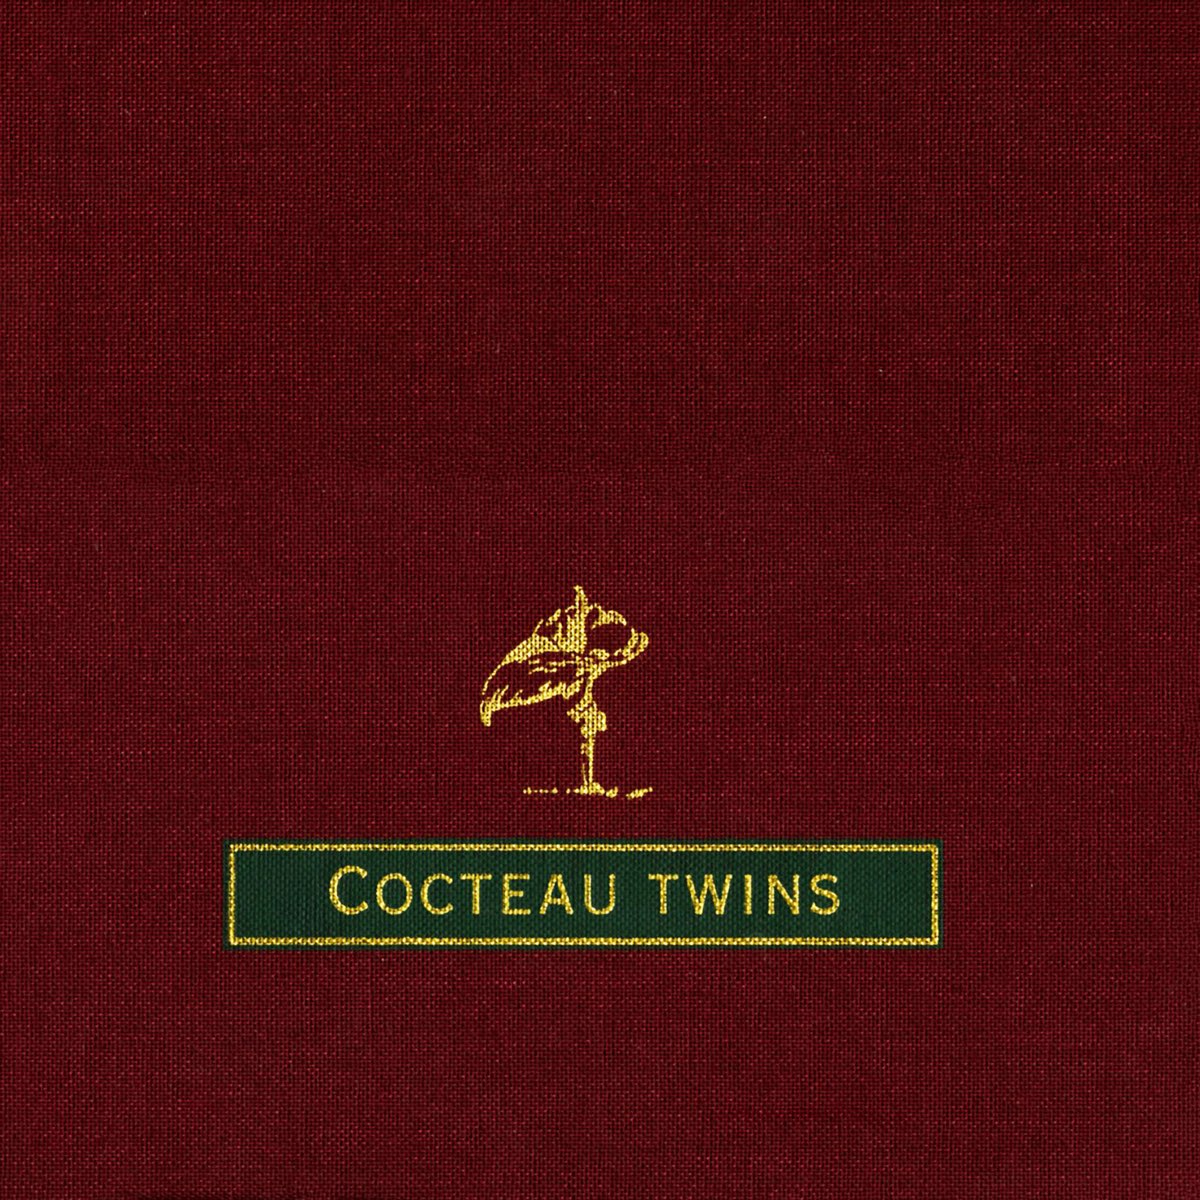 Cocteau Twins Singles Collection - EP by Cocteau Twins on Apple Music